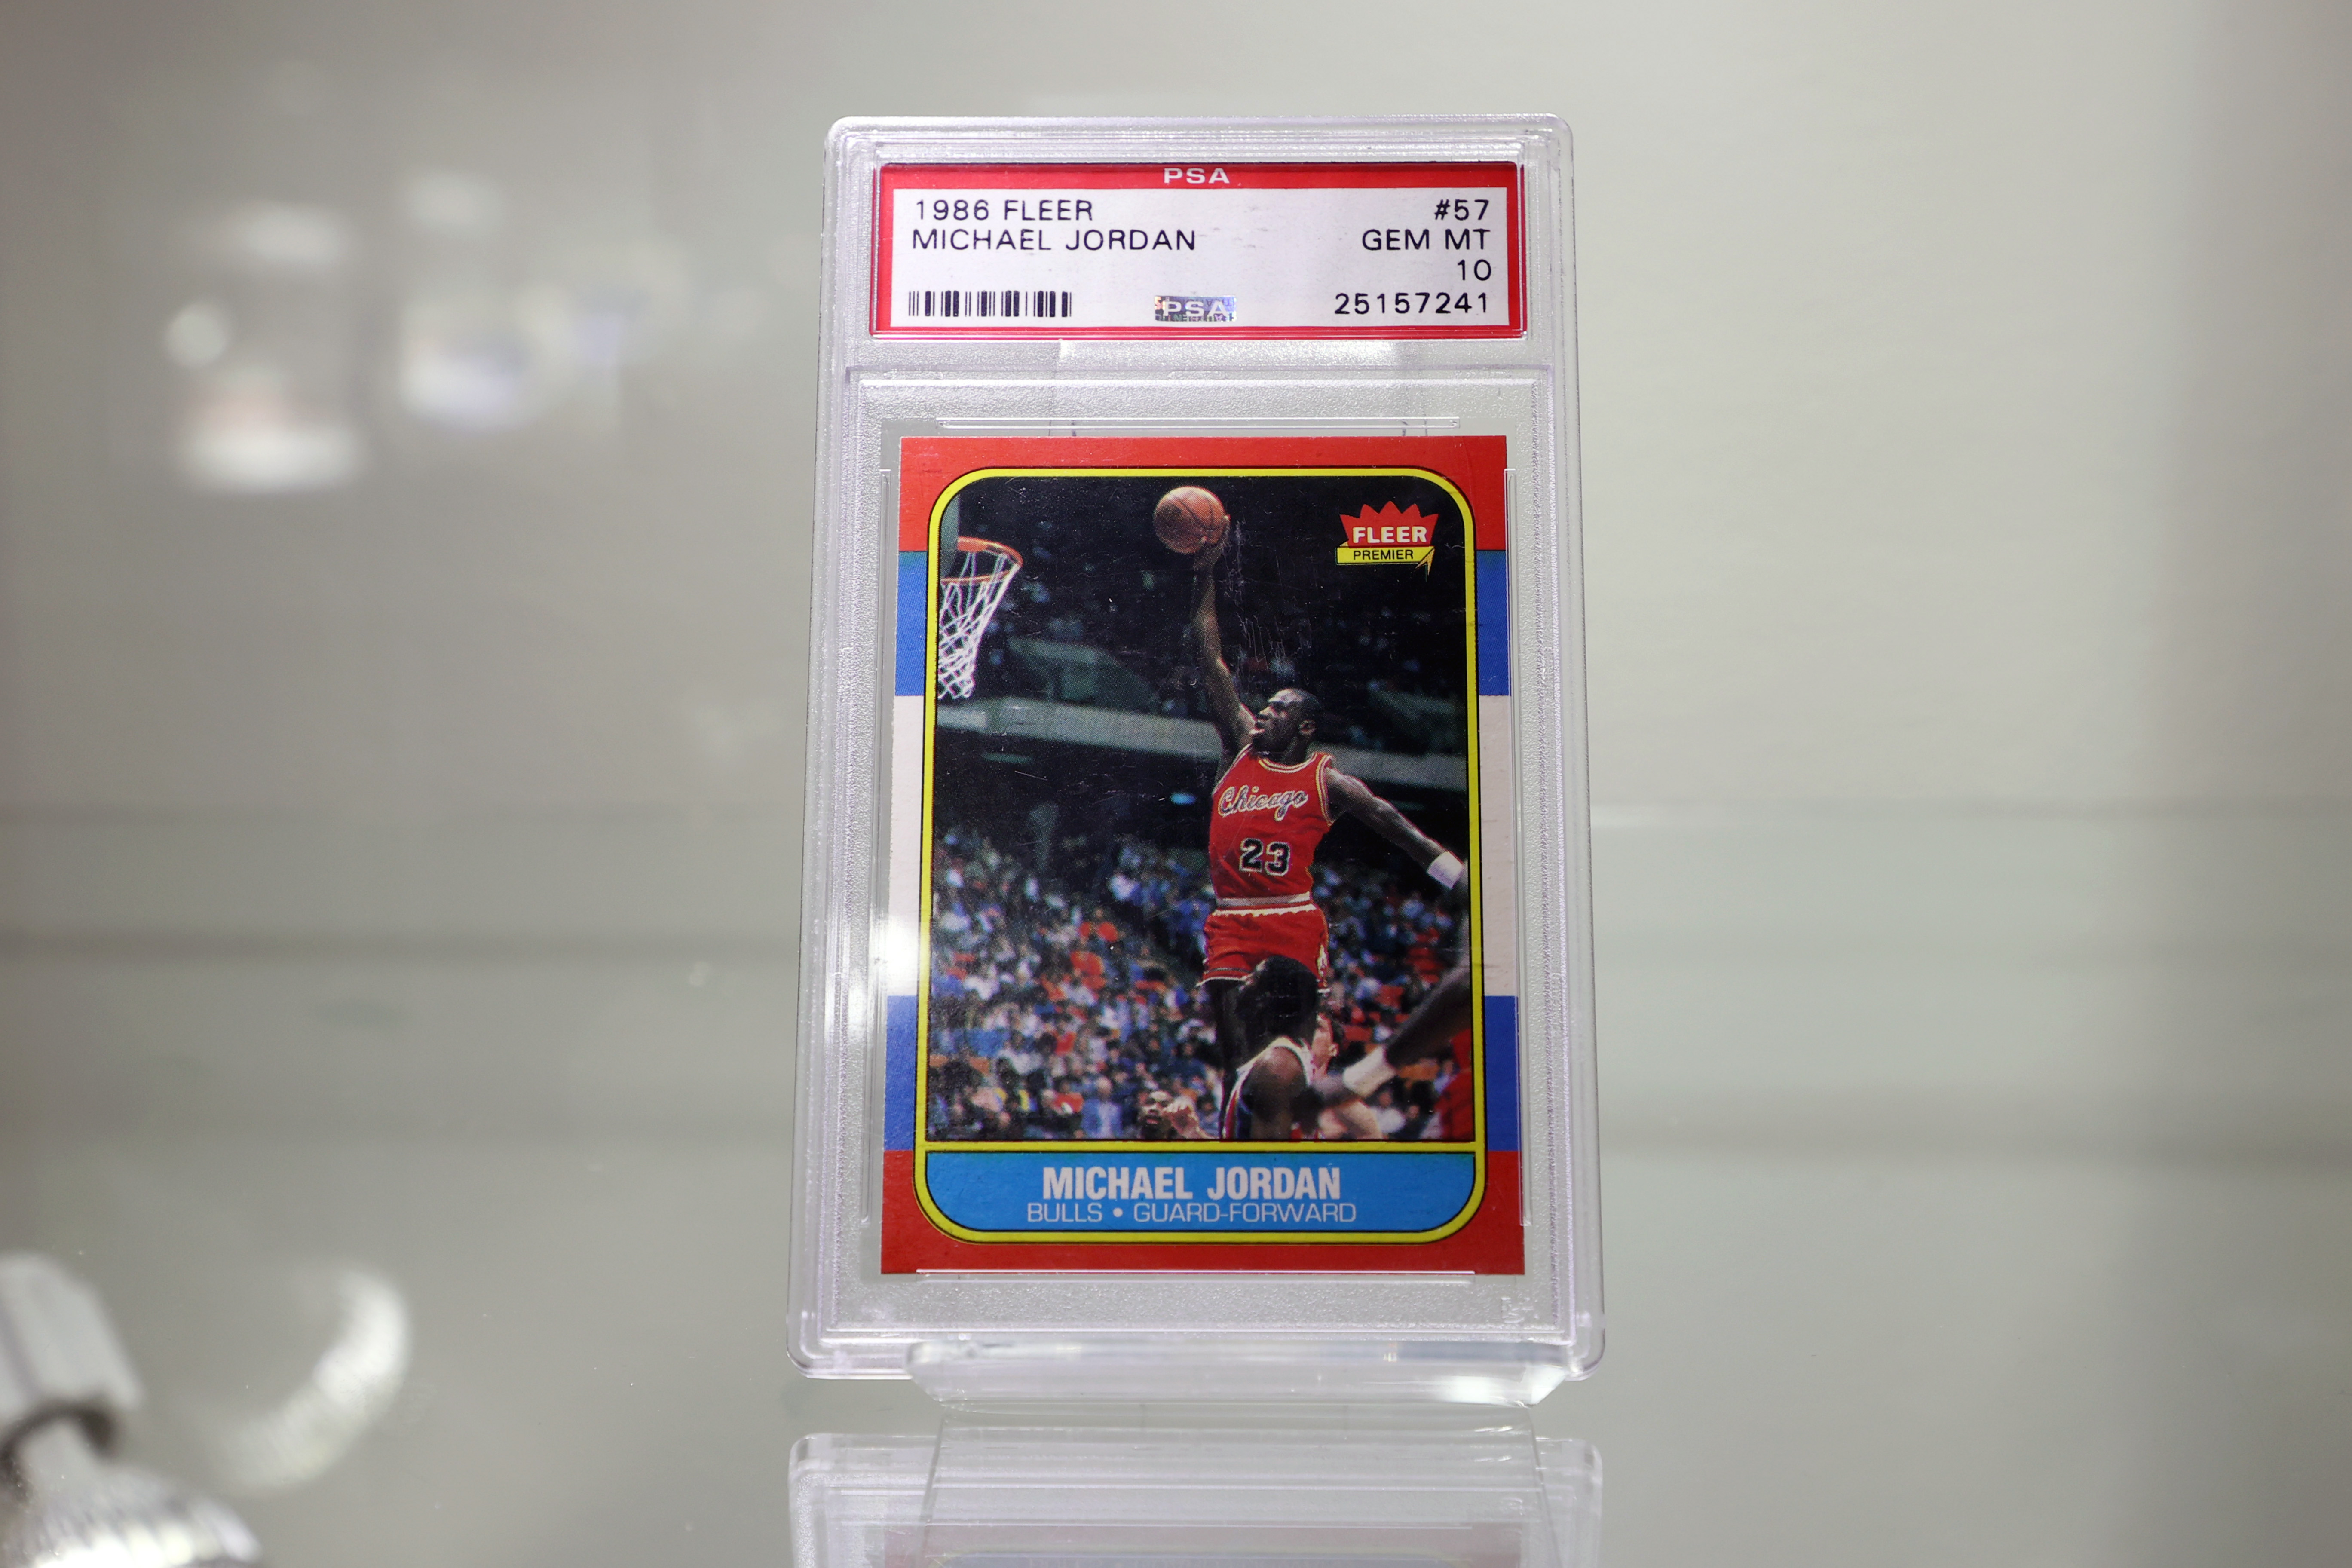 Chris Bosh Rookie Cards Checklist and Memorabilia Buying Guide